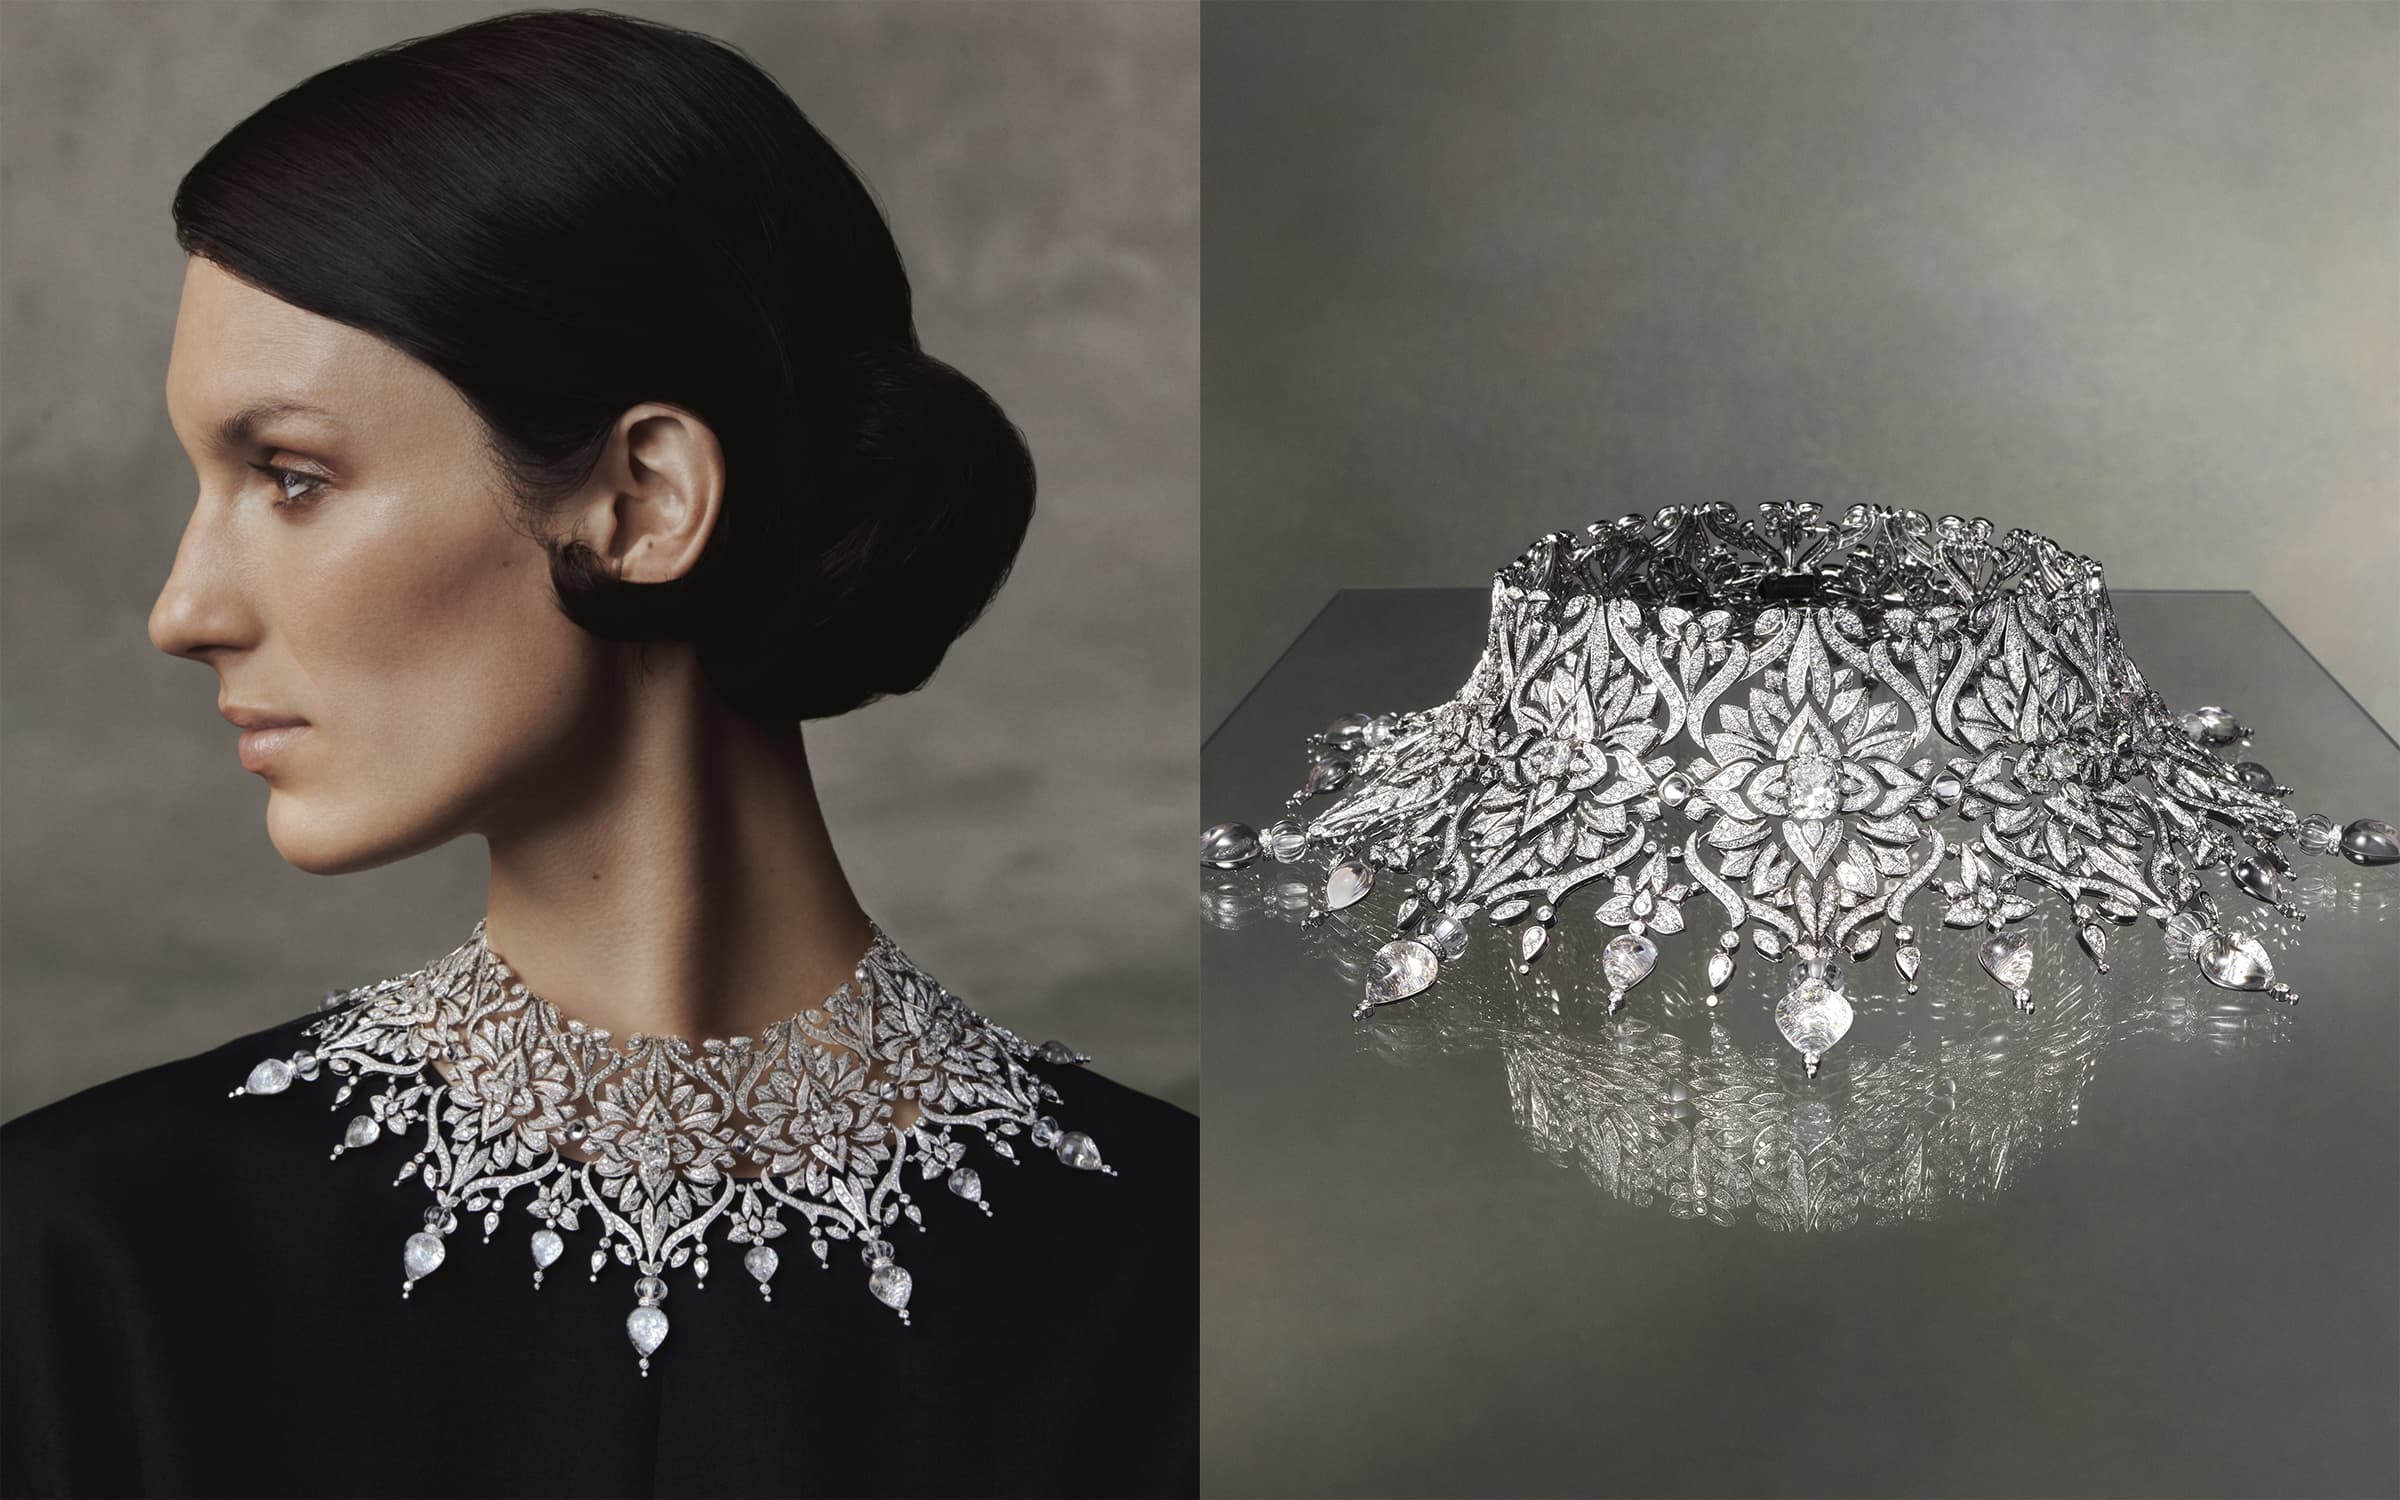 Boucheron New Maharani necklace set with a 4.08 carat cushion-cut diamond, diamonds and rock crystal in white gold from the Histoire de Style New Maharajahs High Jewellery Collection 